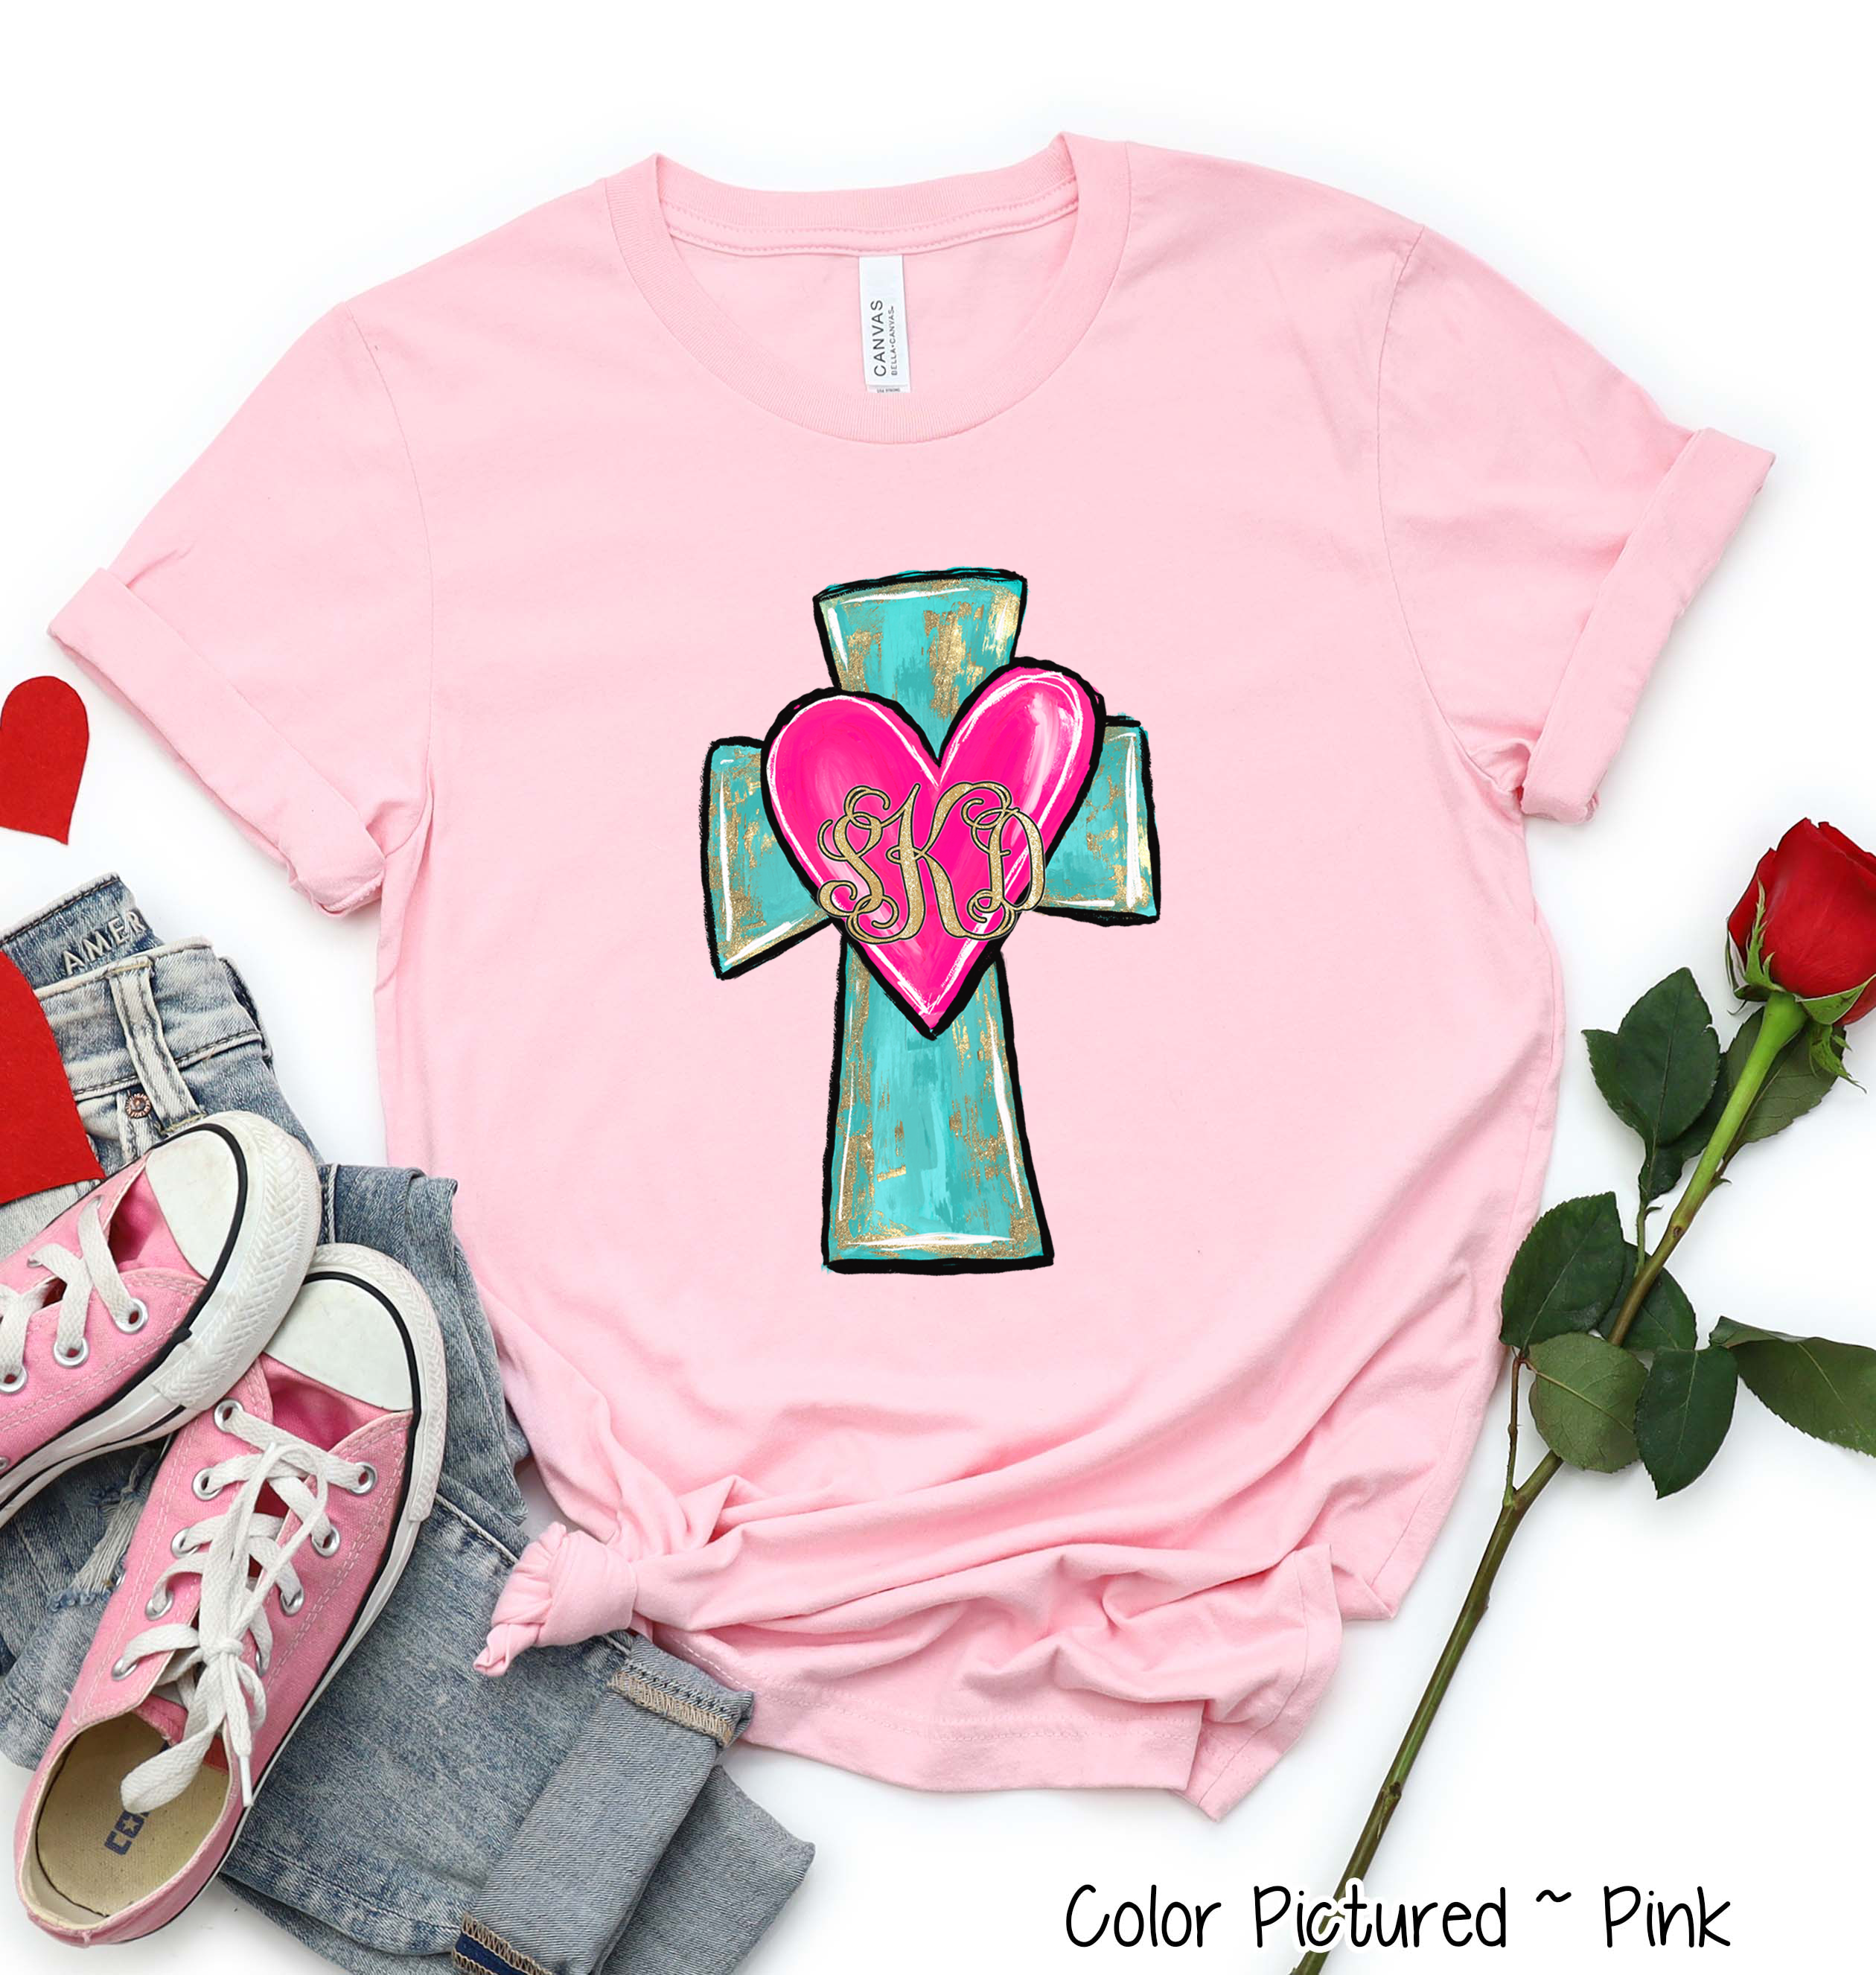 Monogram Cross and Heart with Gold Accents Shirt